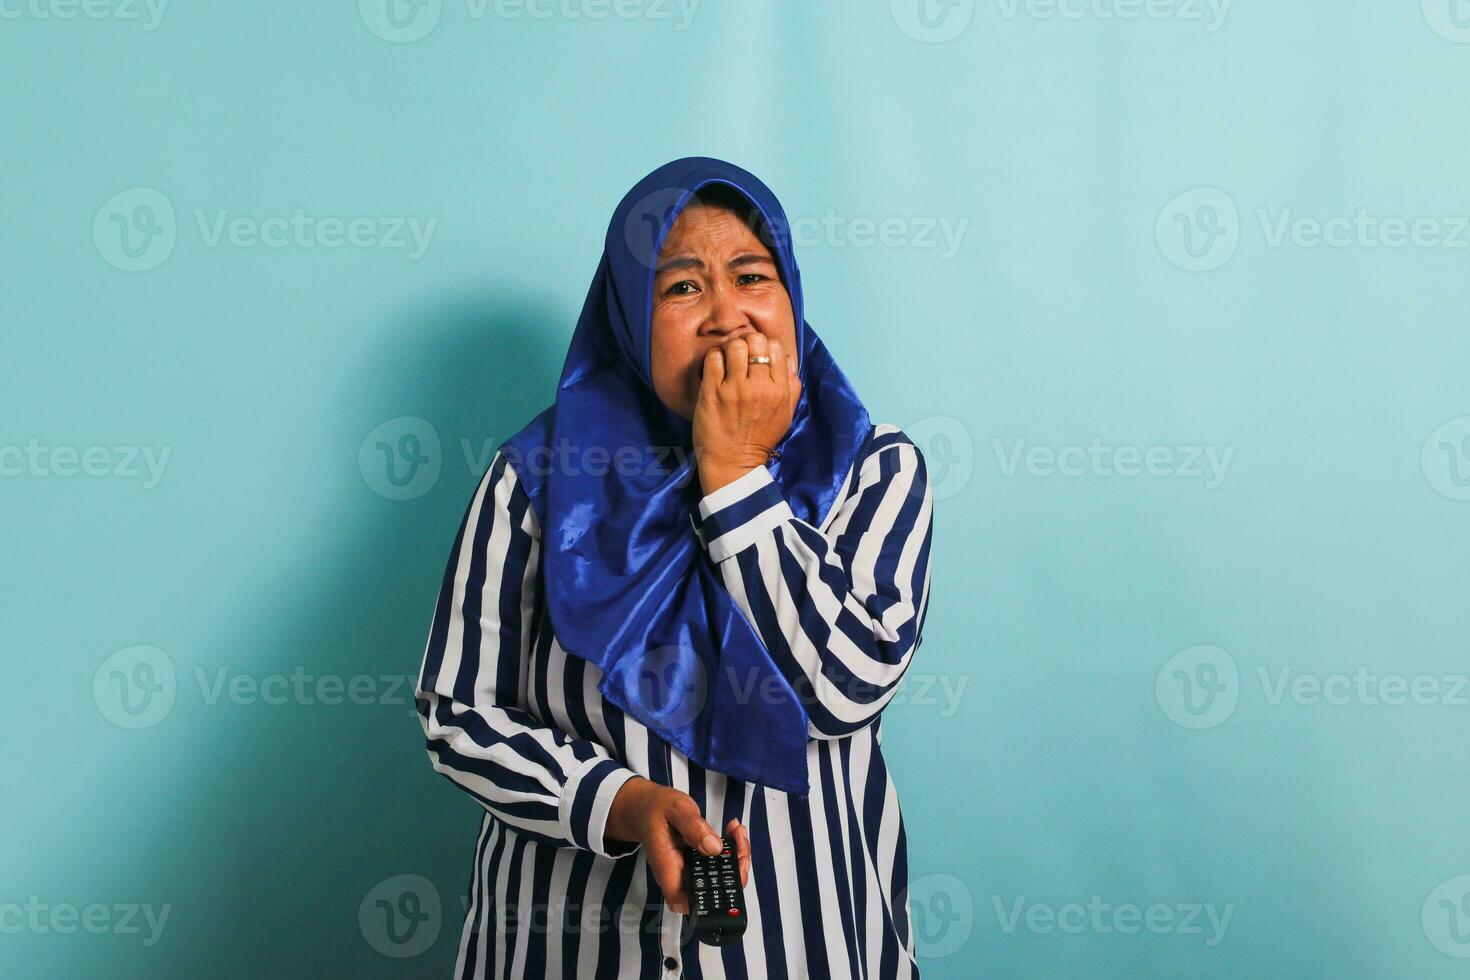 A worried middle-aged Asian woman in a blue hijab and a striped shirt is biting her fingers while holding a remote control and watching a horror movie on TV. She is isolated on a blue background photo